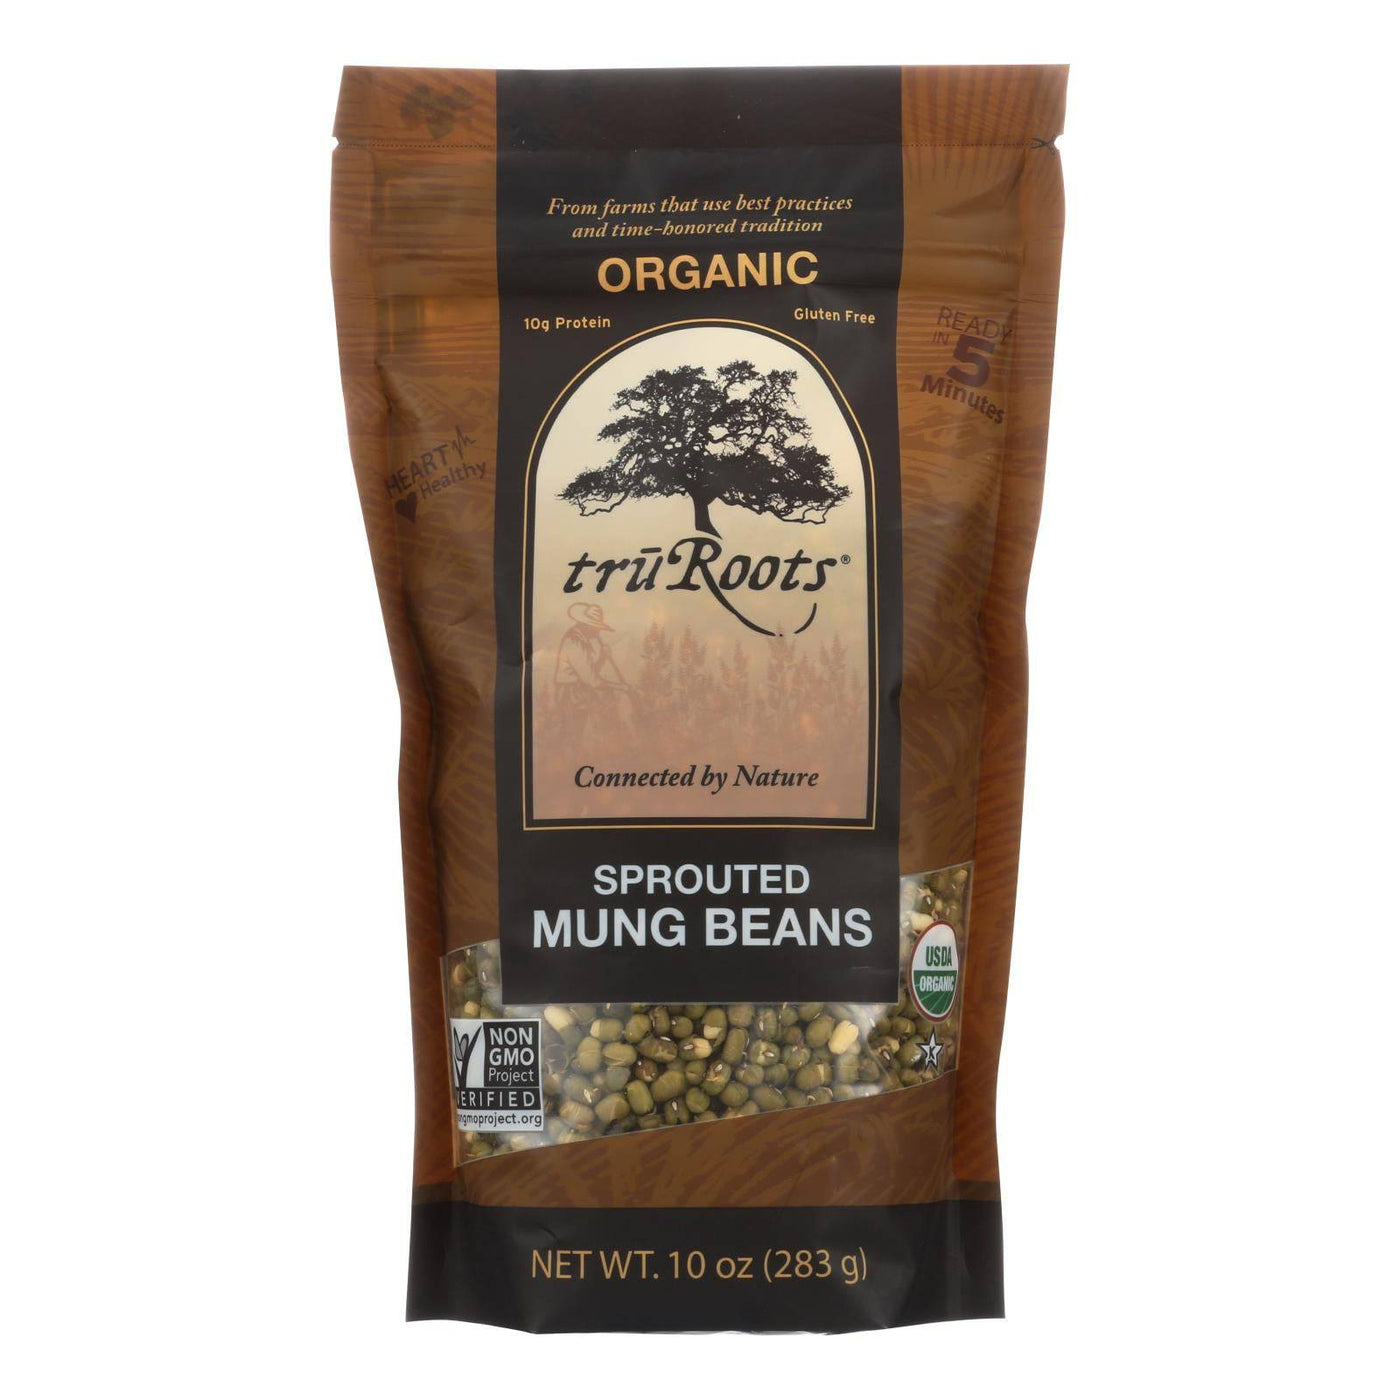 Truroots Organic Mung Beans - Sprouted - Case Of 6 - 10 Oz. | OnlyNaturals.us